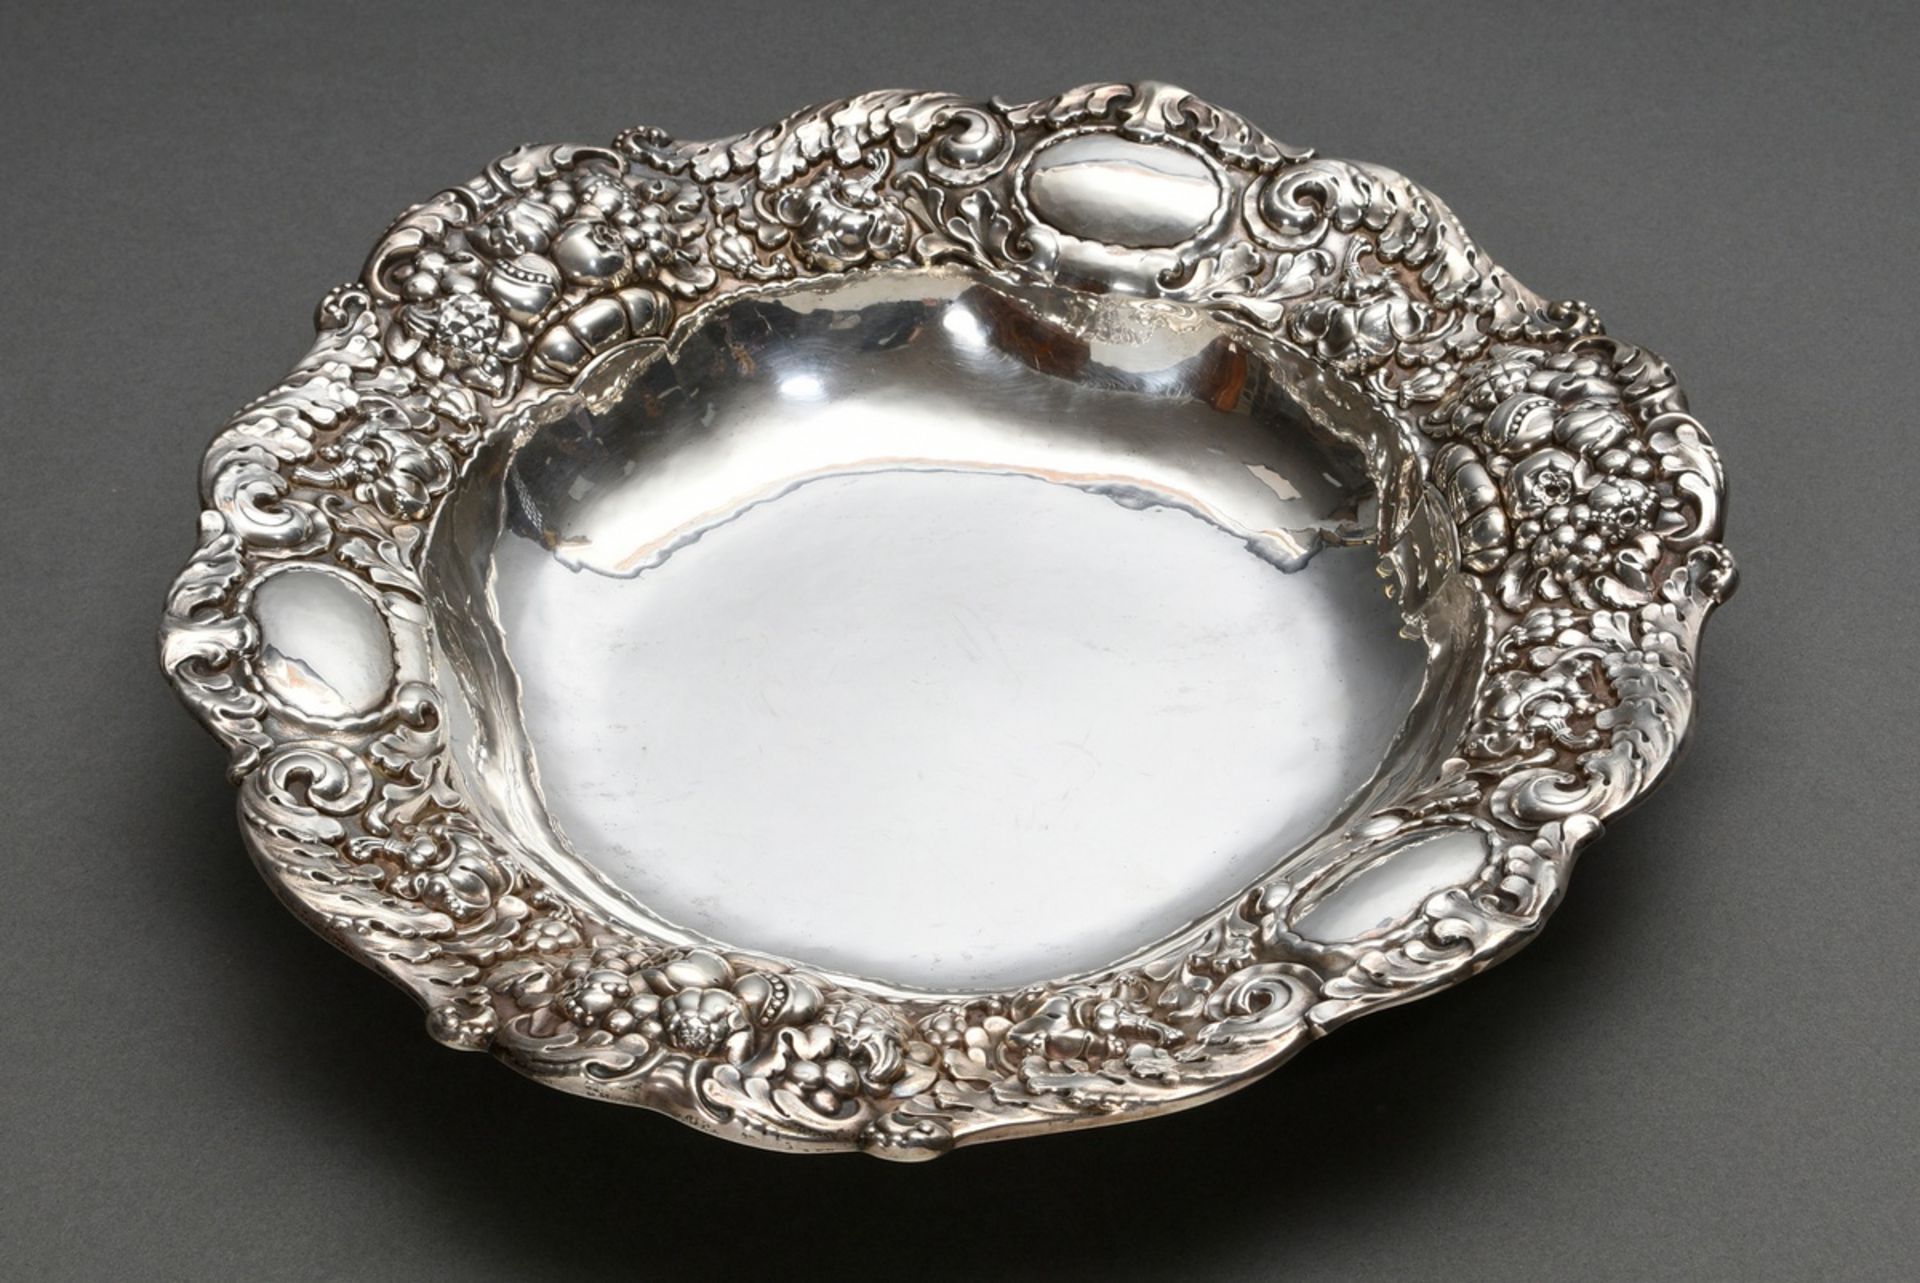 Plate with richly embossed rim "Fruits and leaves", around 1930/50, MM: P. Jahn, No. 11989, silver 